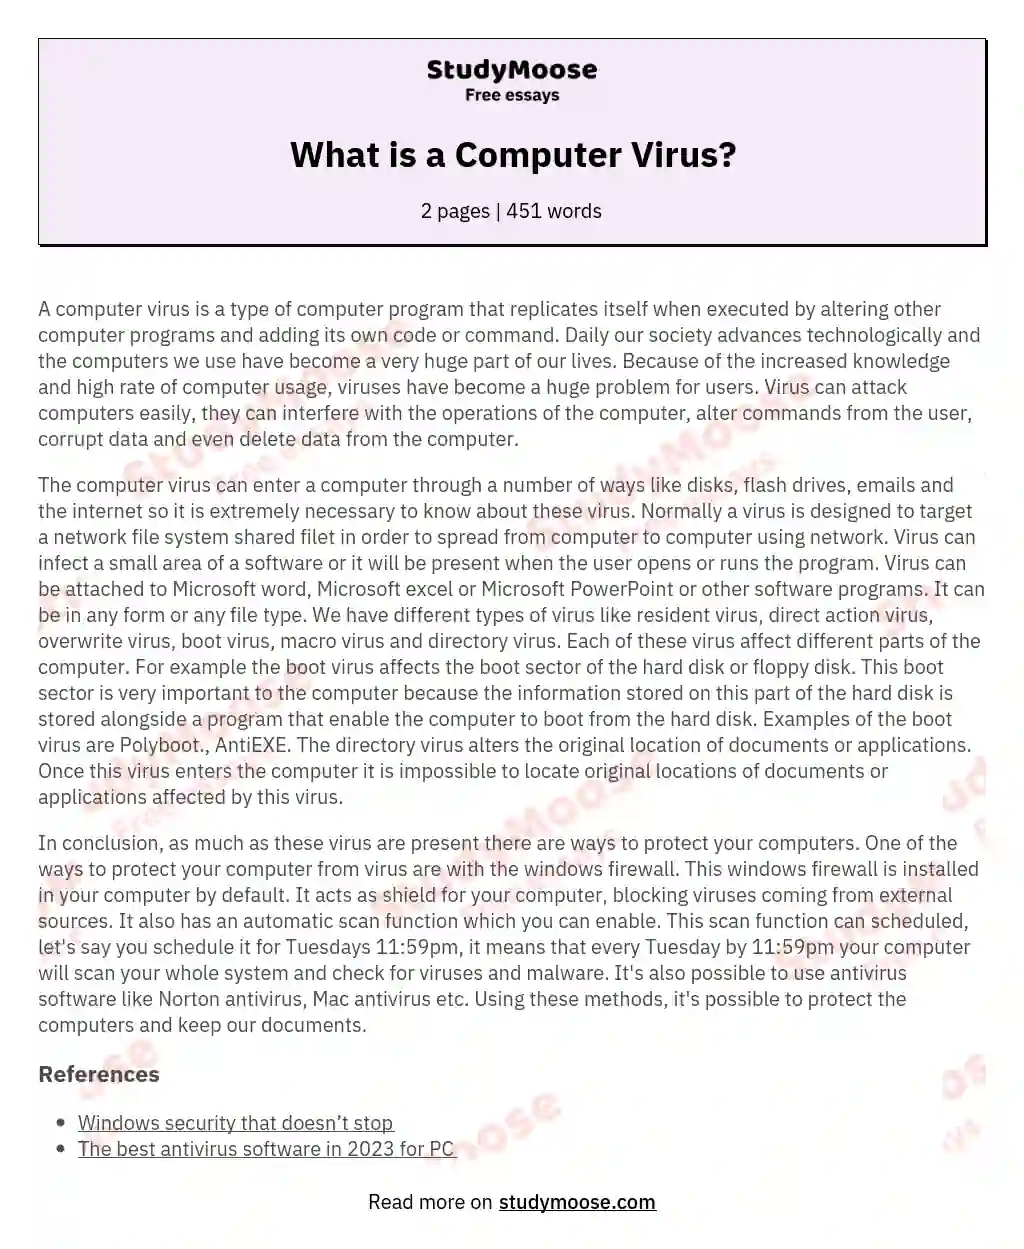 What is a Computer Virus? essay